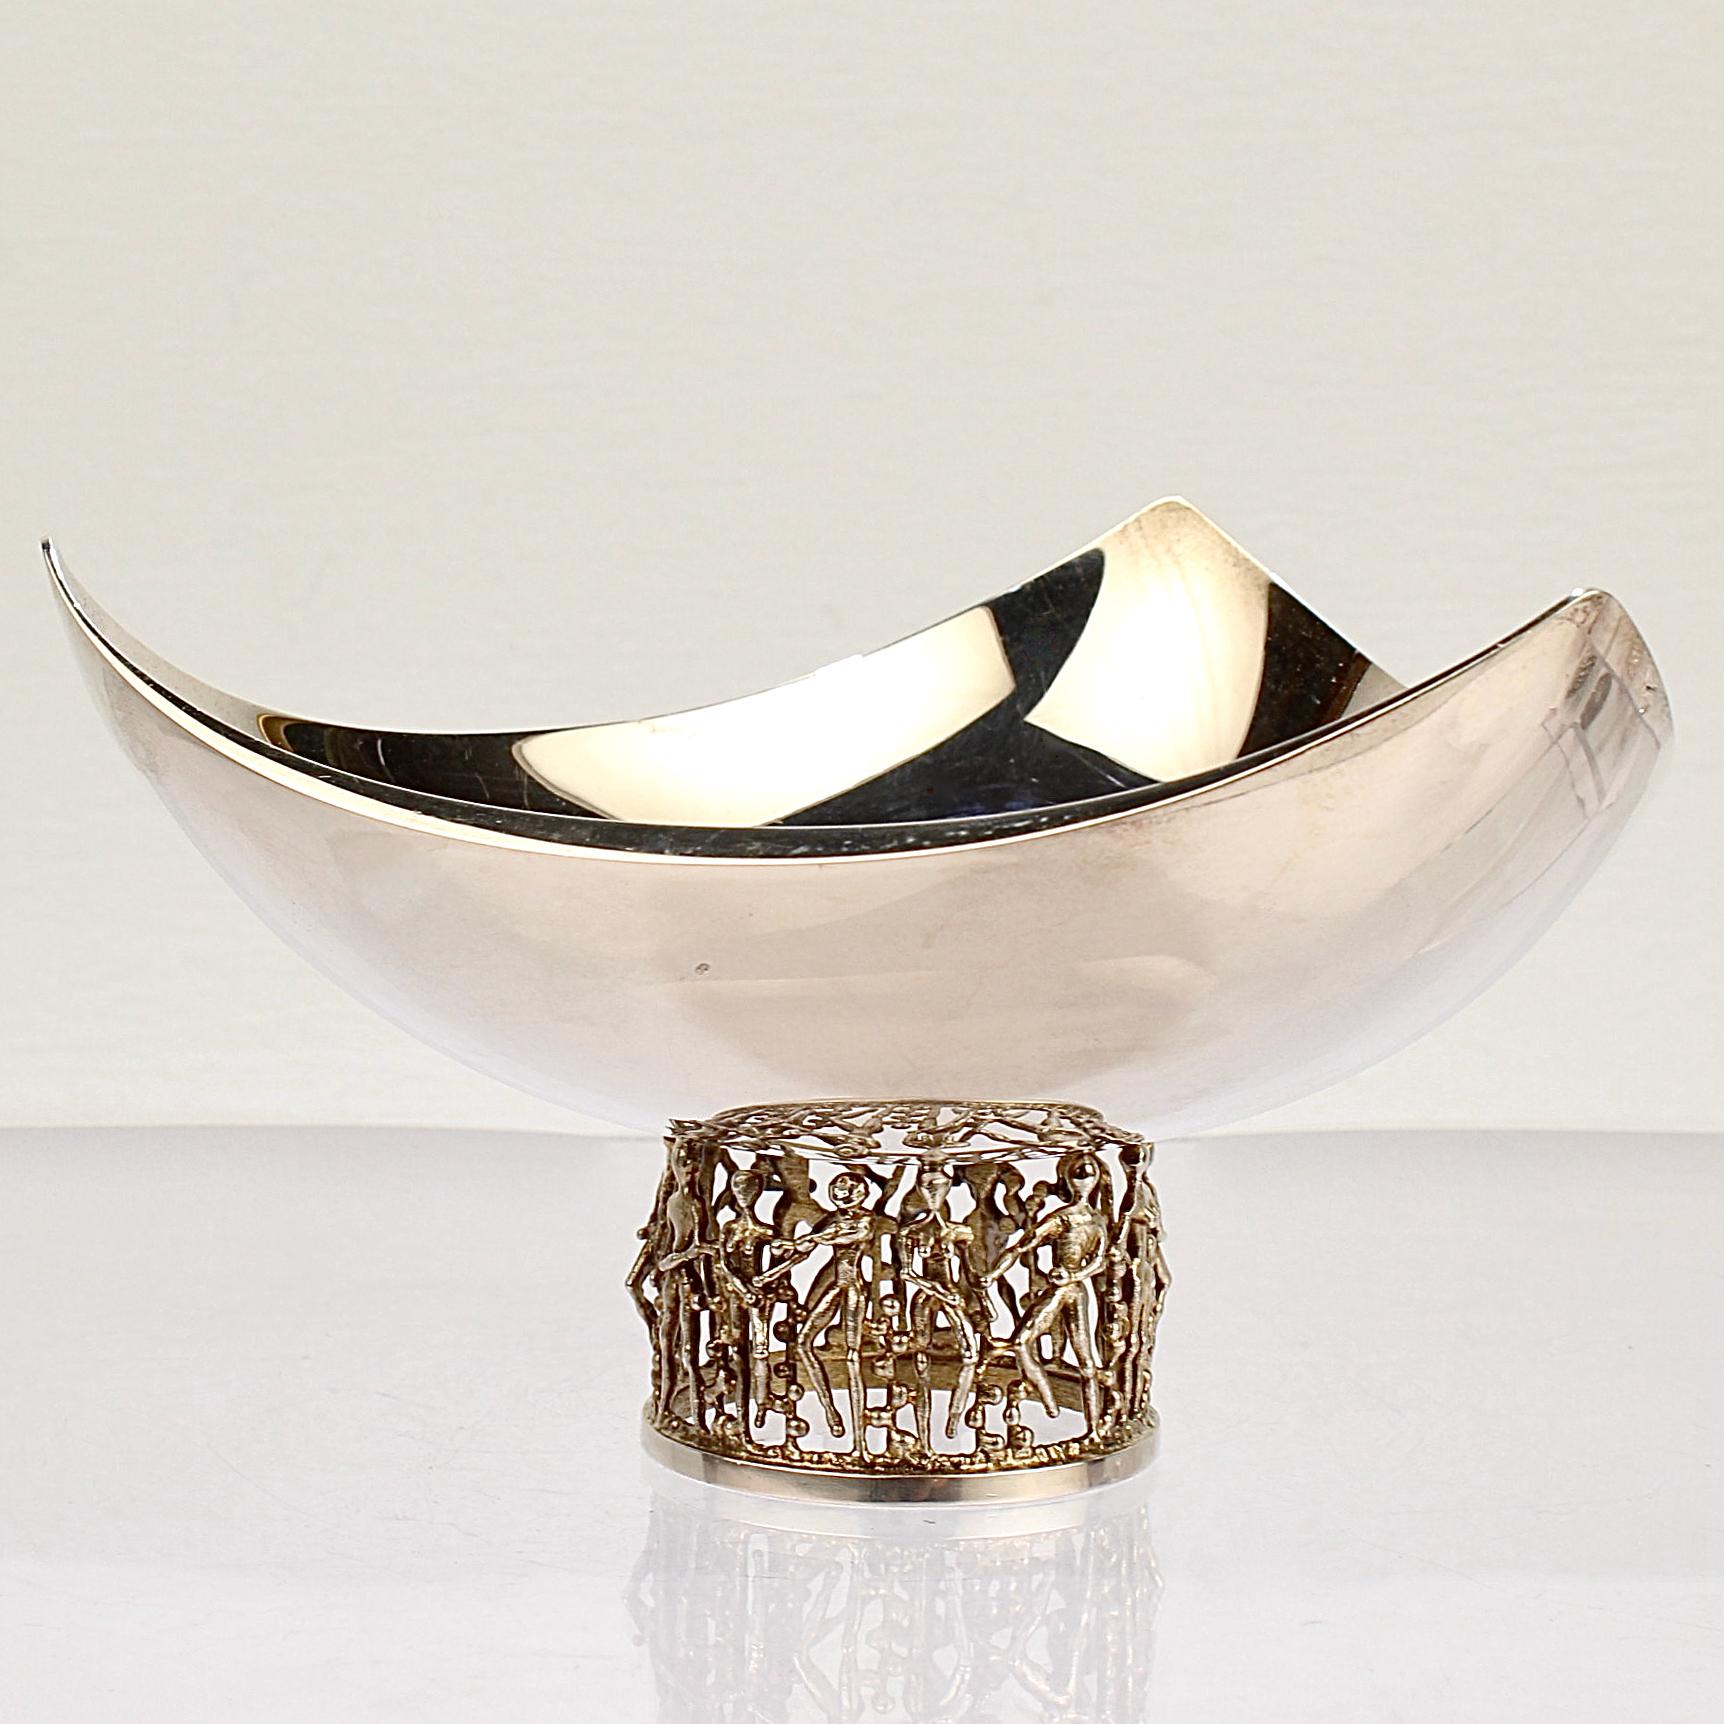 English 1980's Modernist Caryatic Sterling Silver Bowl by Stuart Devlin In Good Condition For Sale In Philadelphia, PA